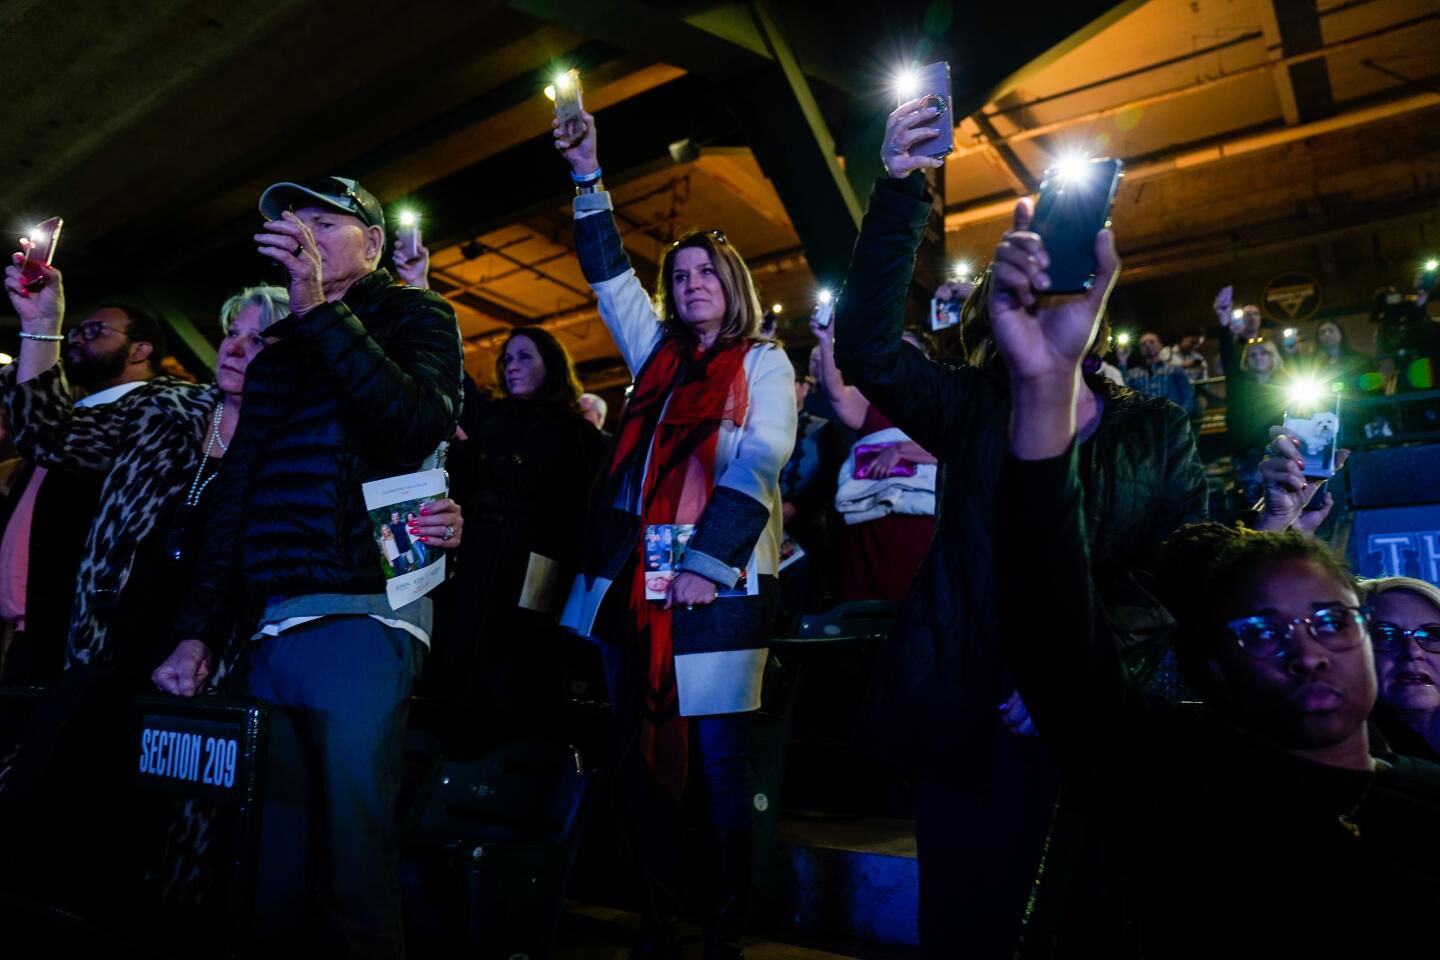 People hold up cell phones with lights on, during a celebration of life ceremony at Angel Stadium on Monday to honor the lives of John, Keri and Alyssa Altobelli.